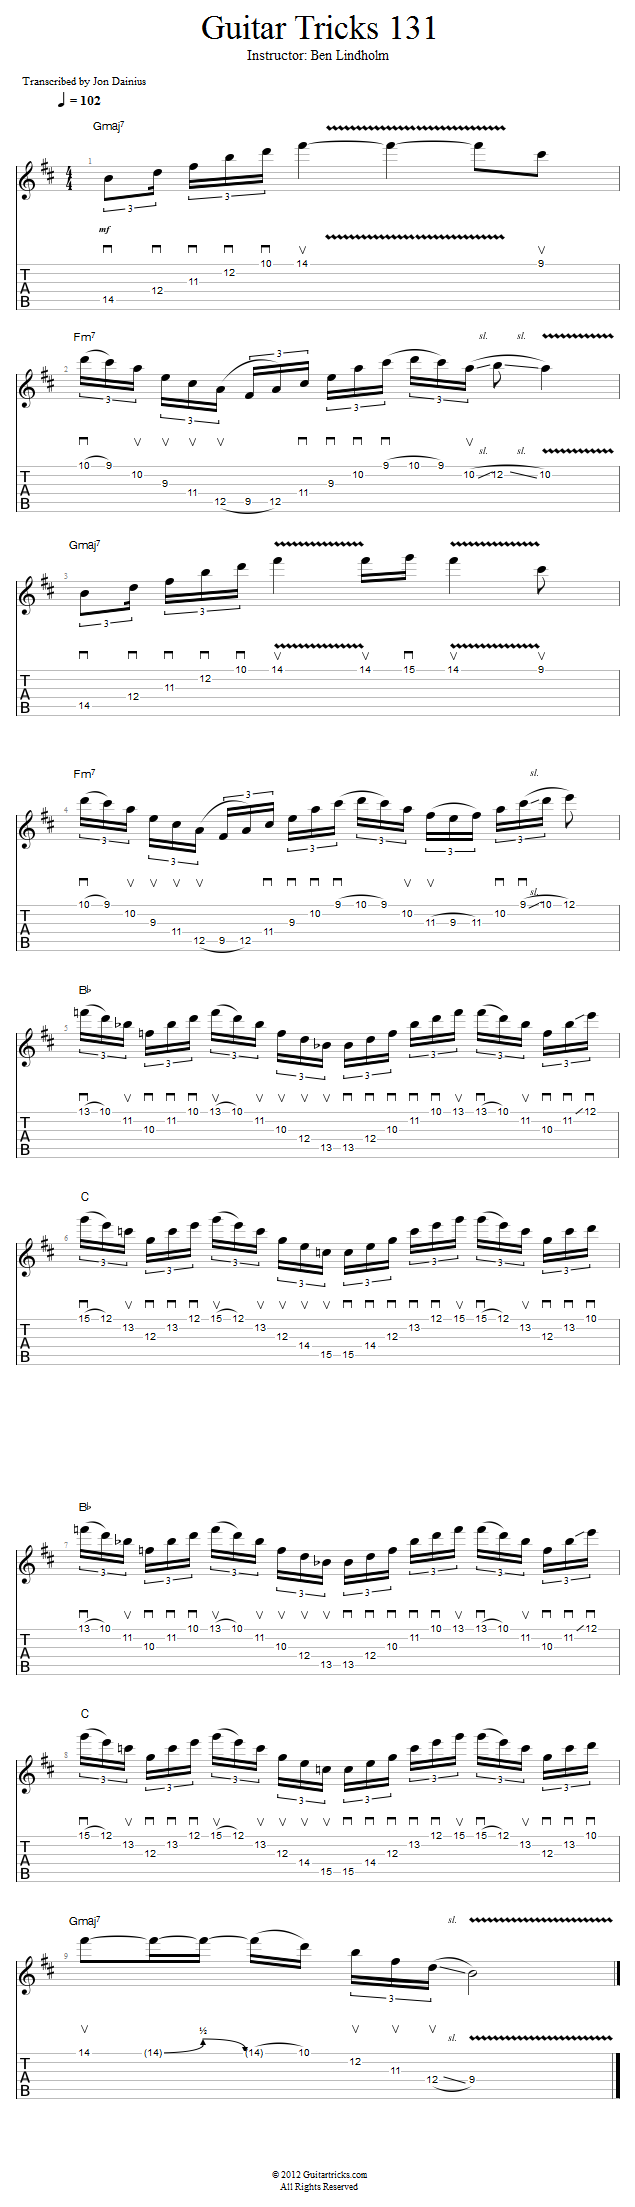 Guitar Tricks 131: 5-String Sweeps song notation